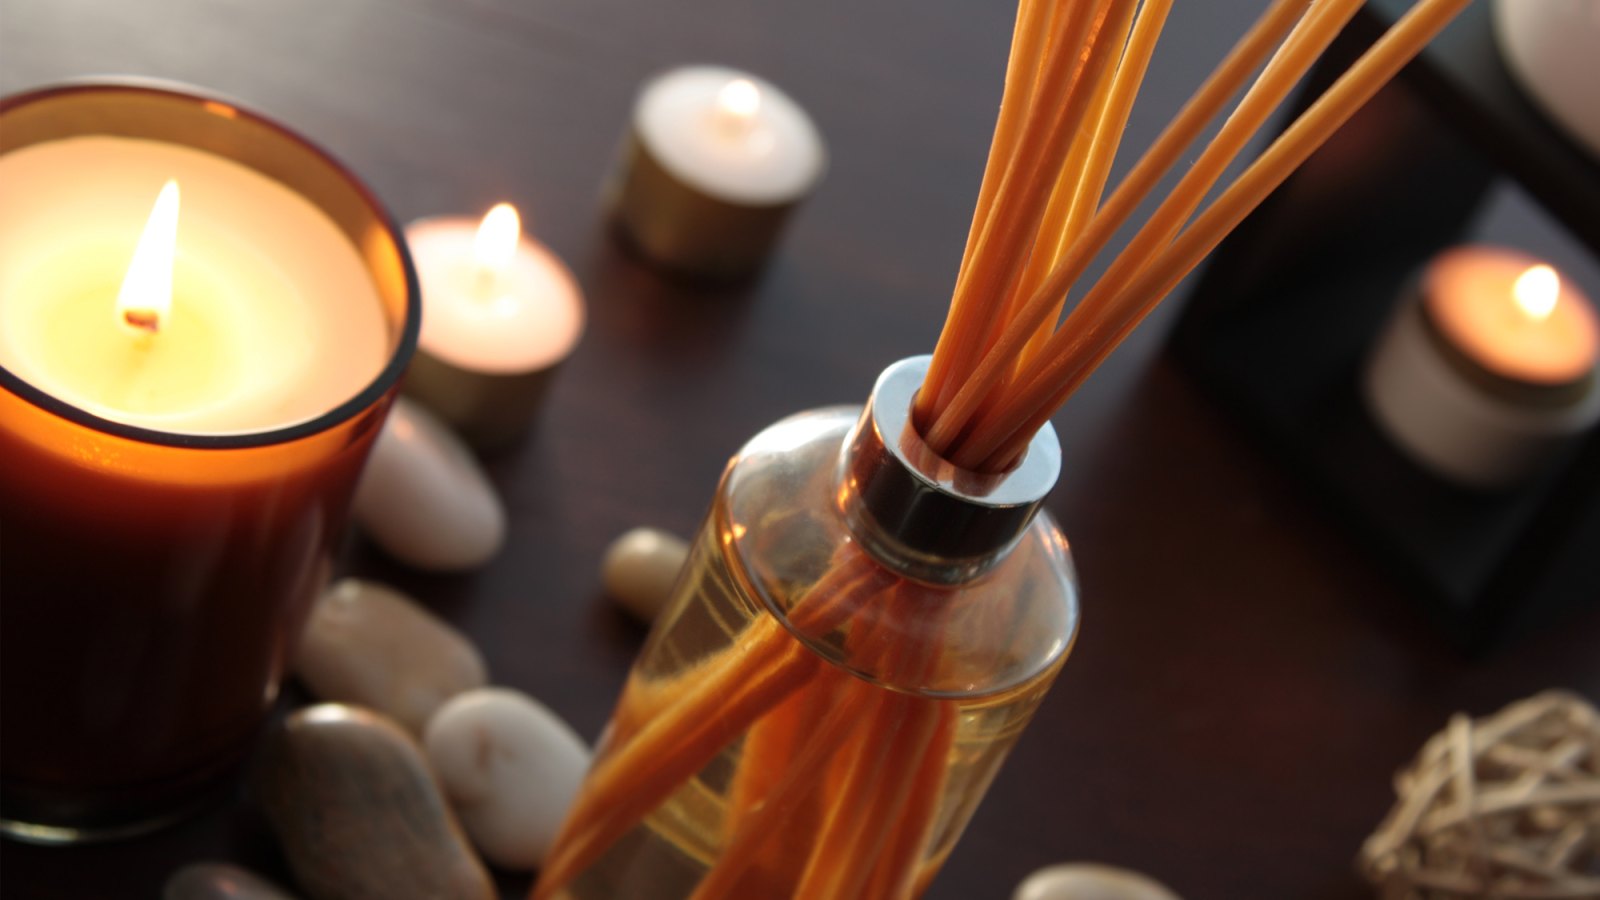 Close up of a bottle of fragrance diffuser with reeds.